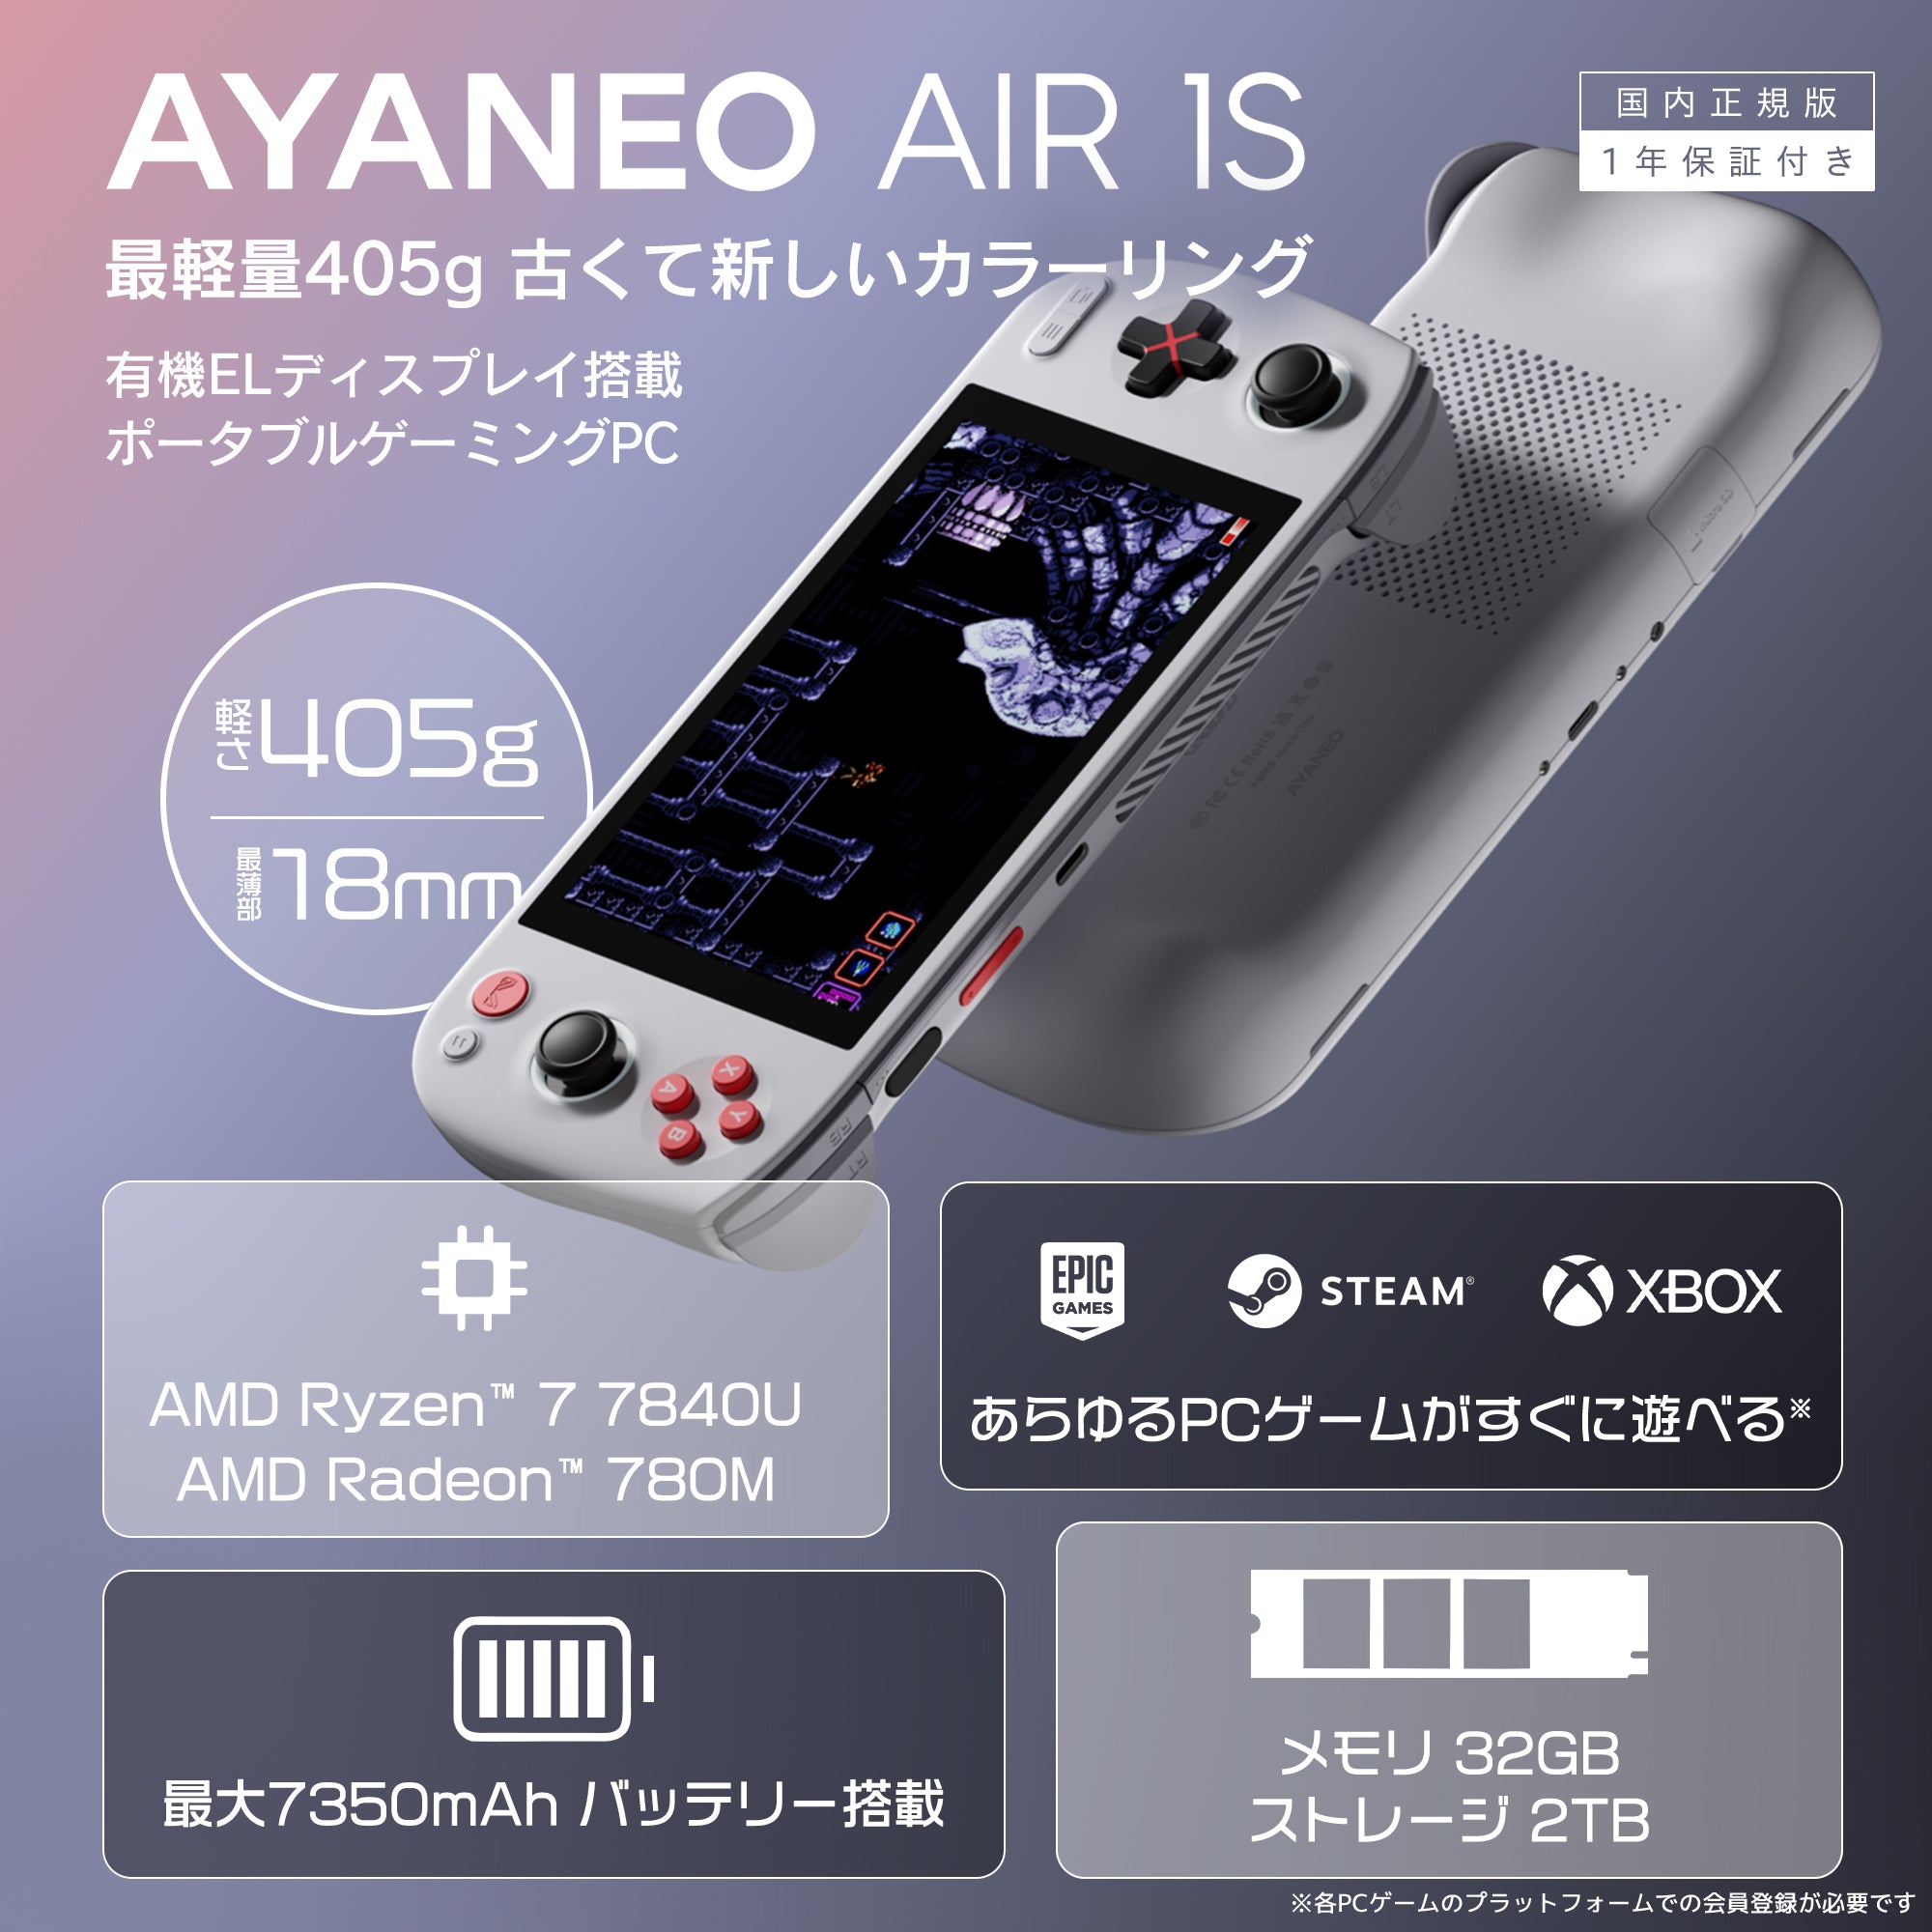 AYANEO AIR 1S